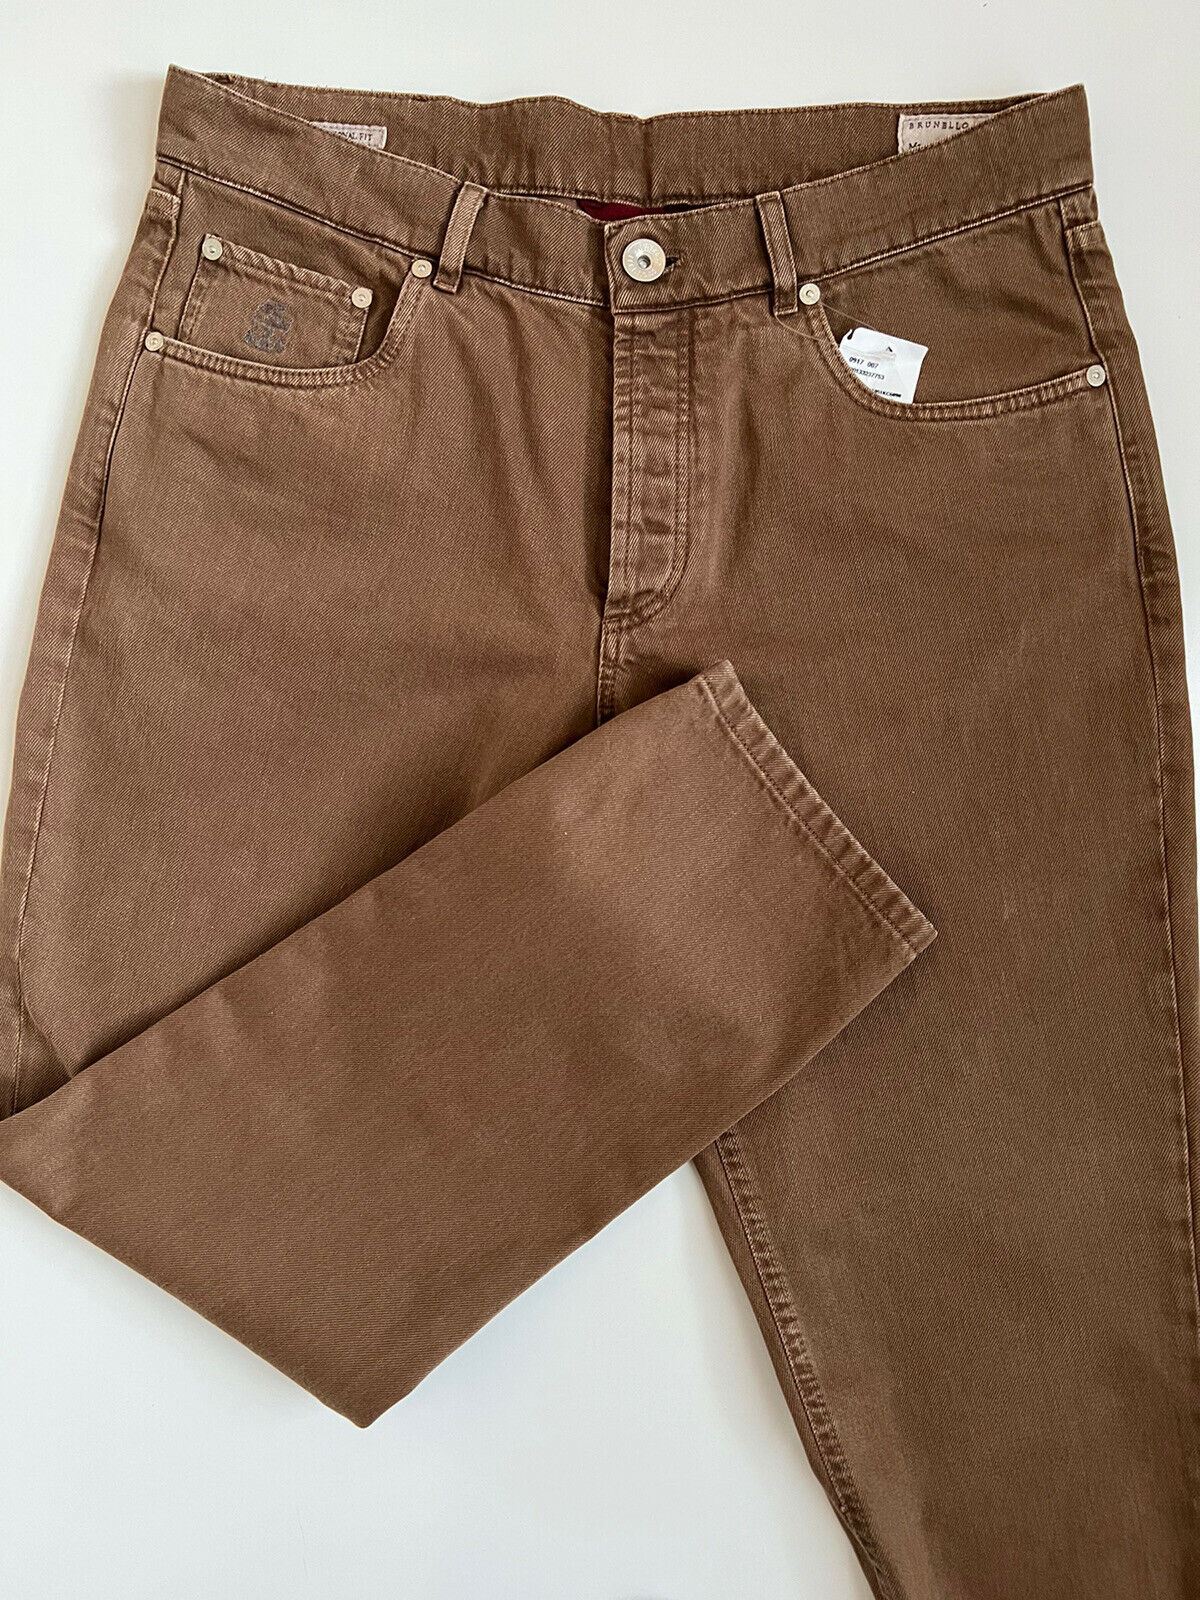 NWT $540 Brunello Cucinelli Men's Brown Jeans 34 US (50 Eu) Made in Italy